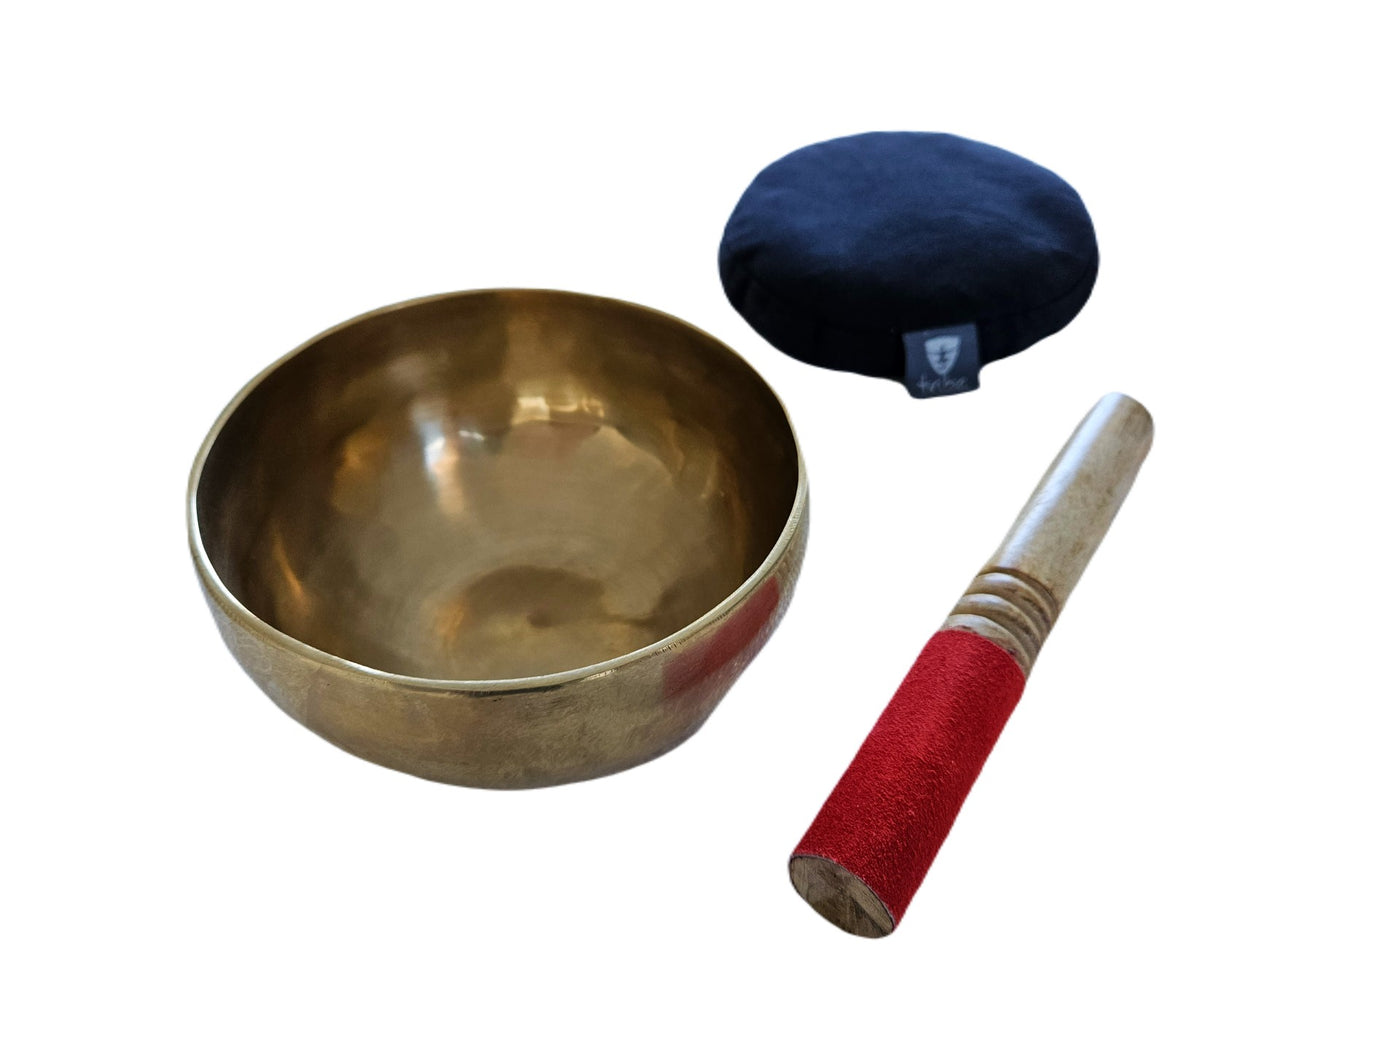 Tibetan Singing Bowl - brass bowl, wooden striker & cotton pad, side by side - TRIBE | Eco Yoga Store